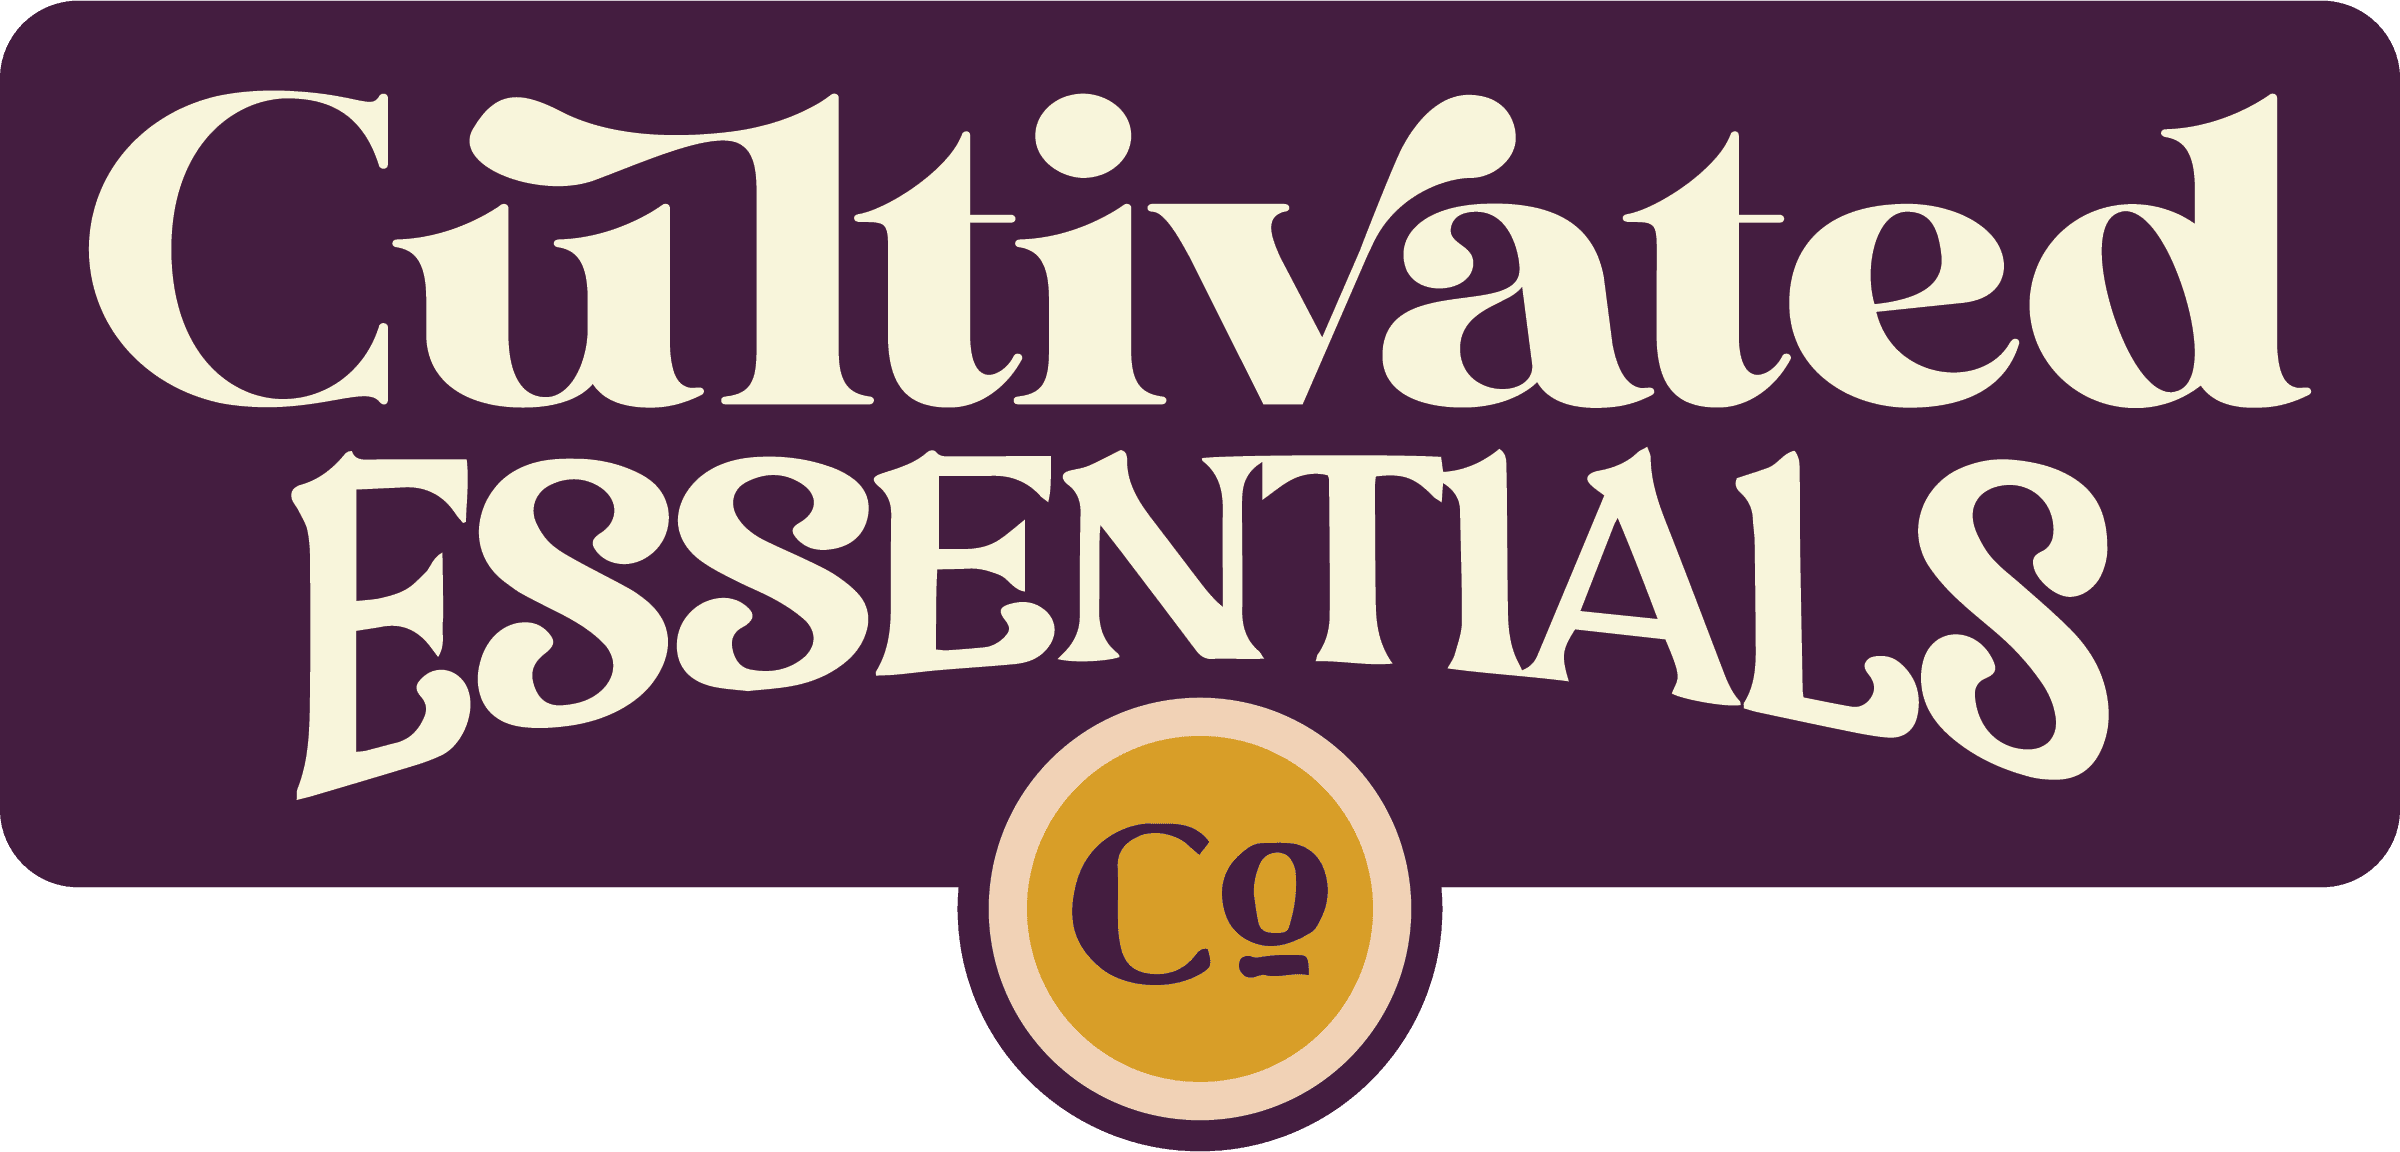 Cultivated Essentials Co.